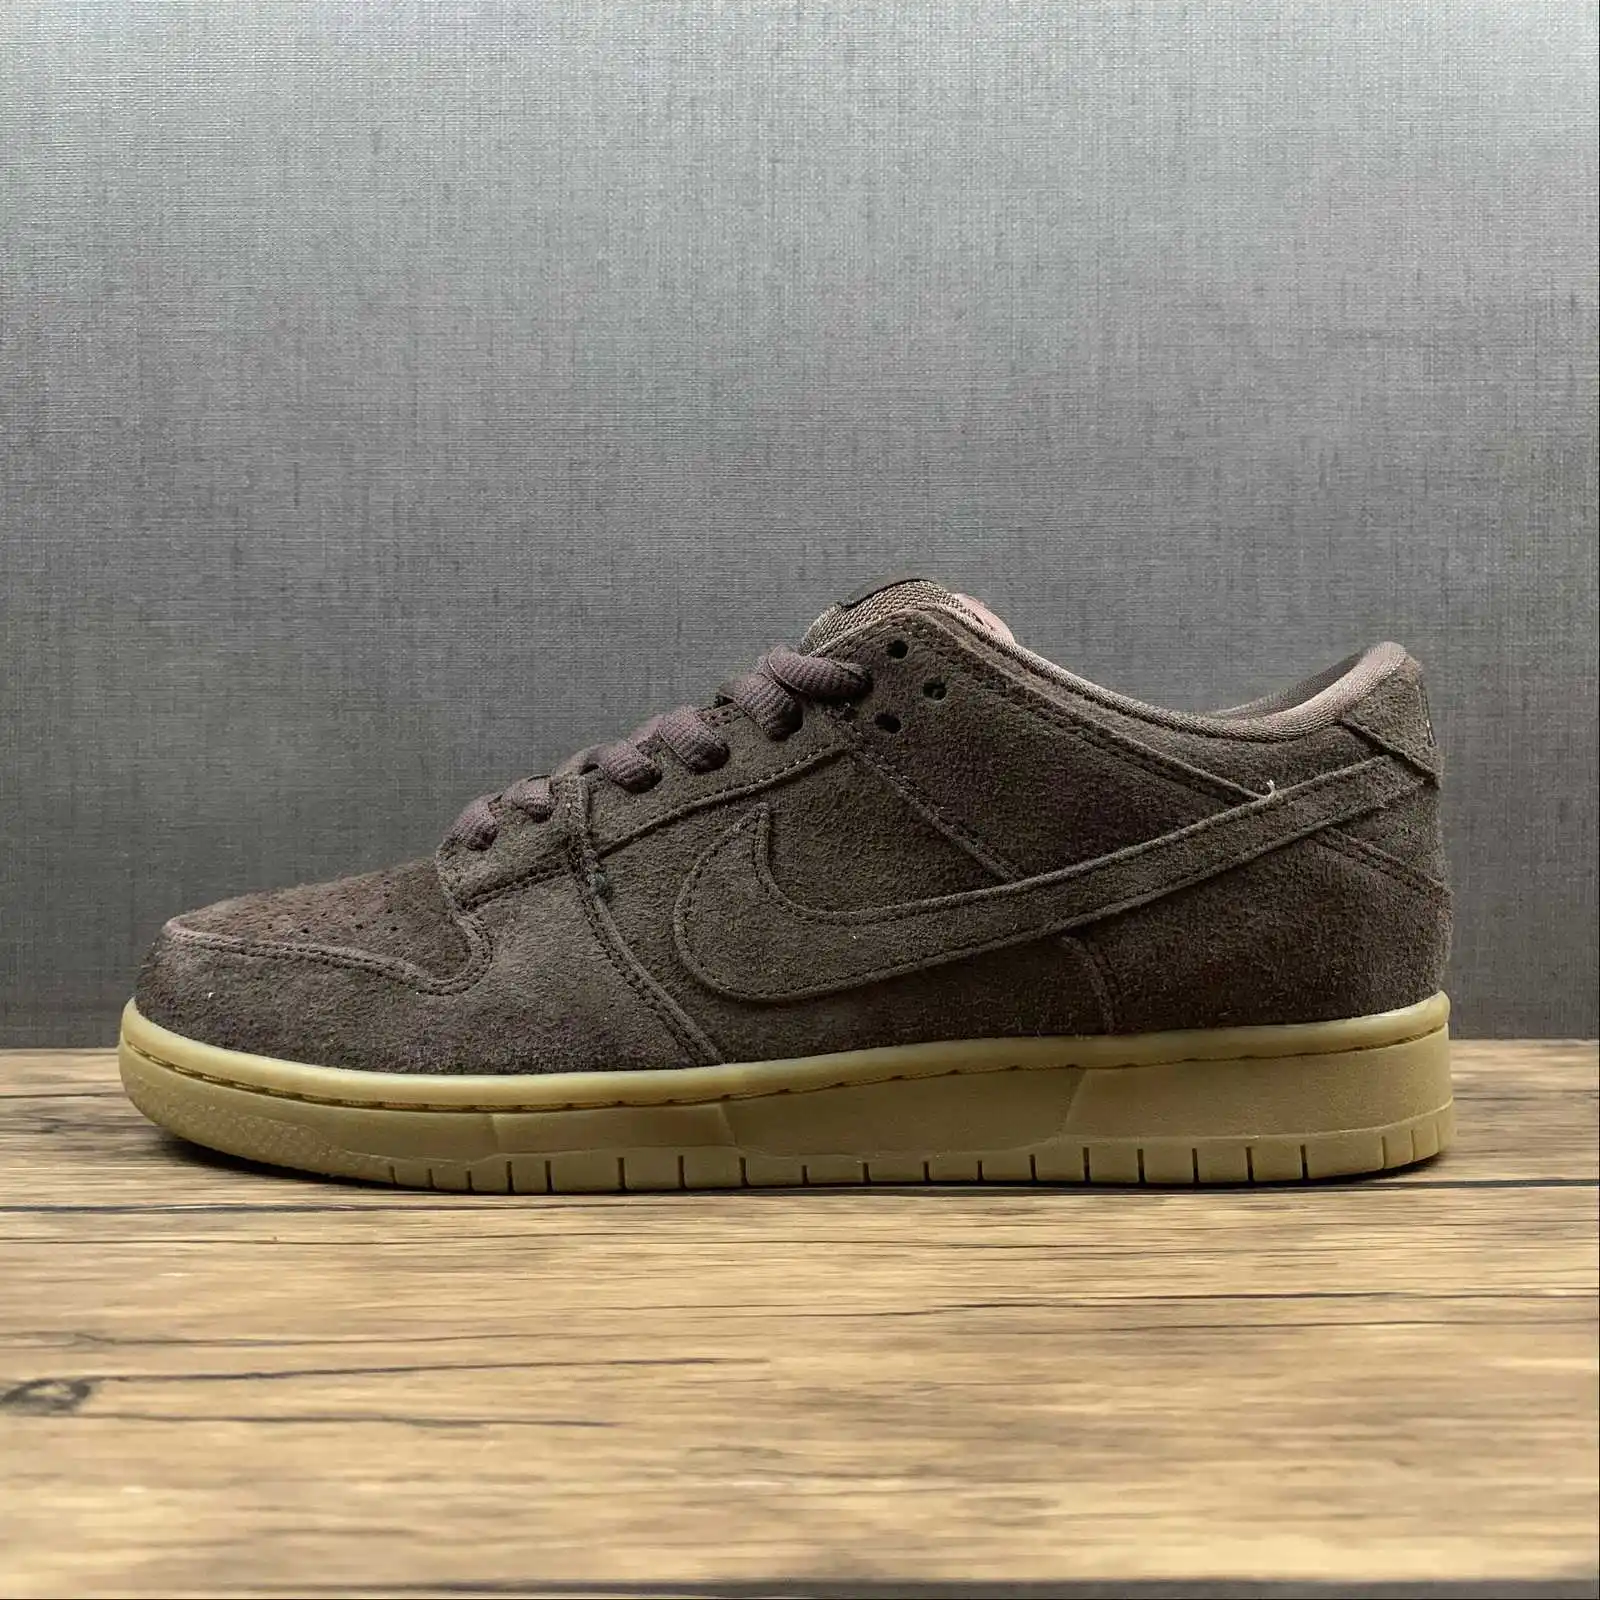 

2021 Top Quality Sports Shoes Sean Cliver Holiday Special Nike SB Dunks Low Sneaker for Women Men